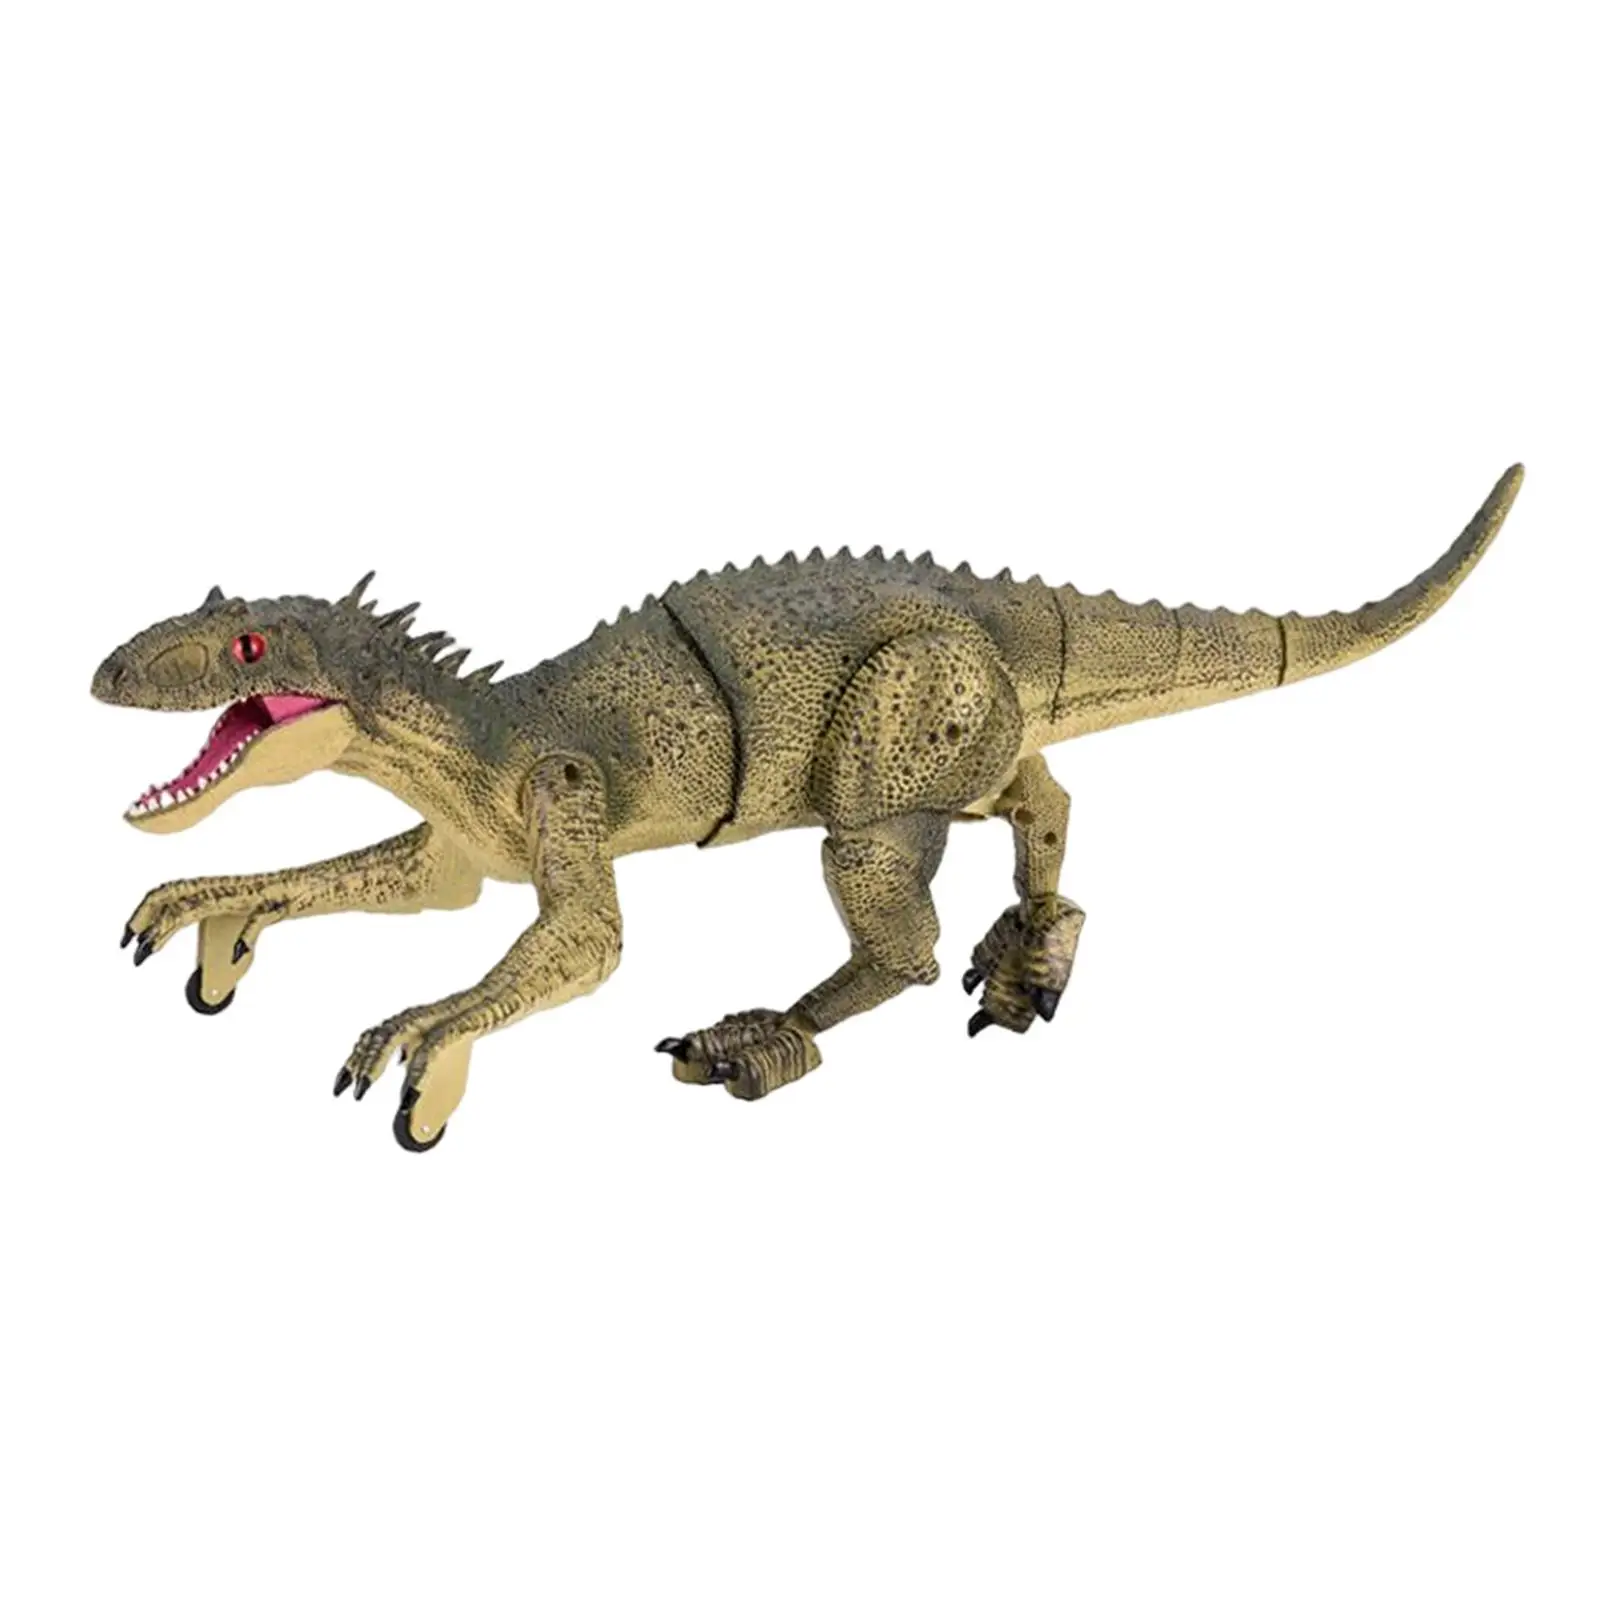 2.4G Dinosaur Toy Realistic Walking Dinosaur Multifunction RC Intelligent Electric Toy Remote Control for Girls Boys Gift